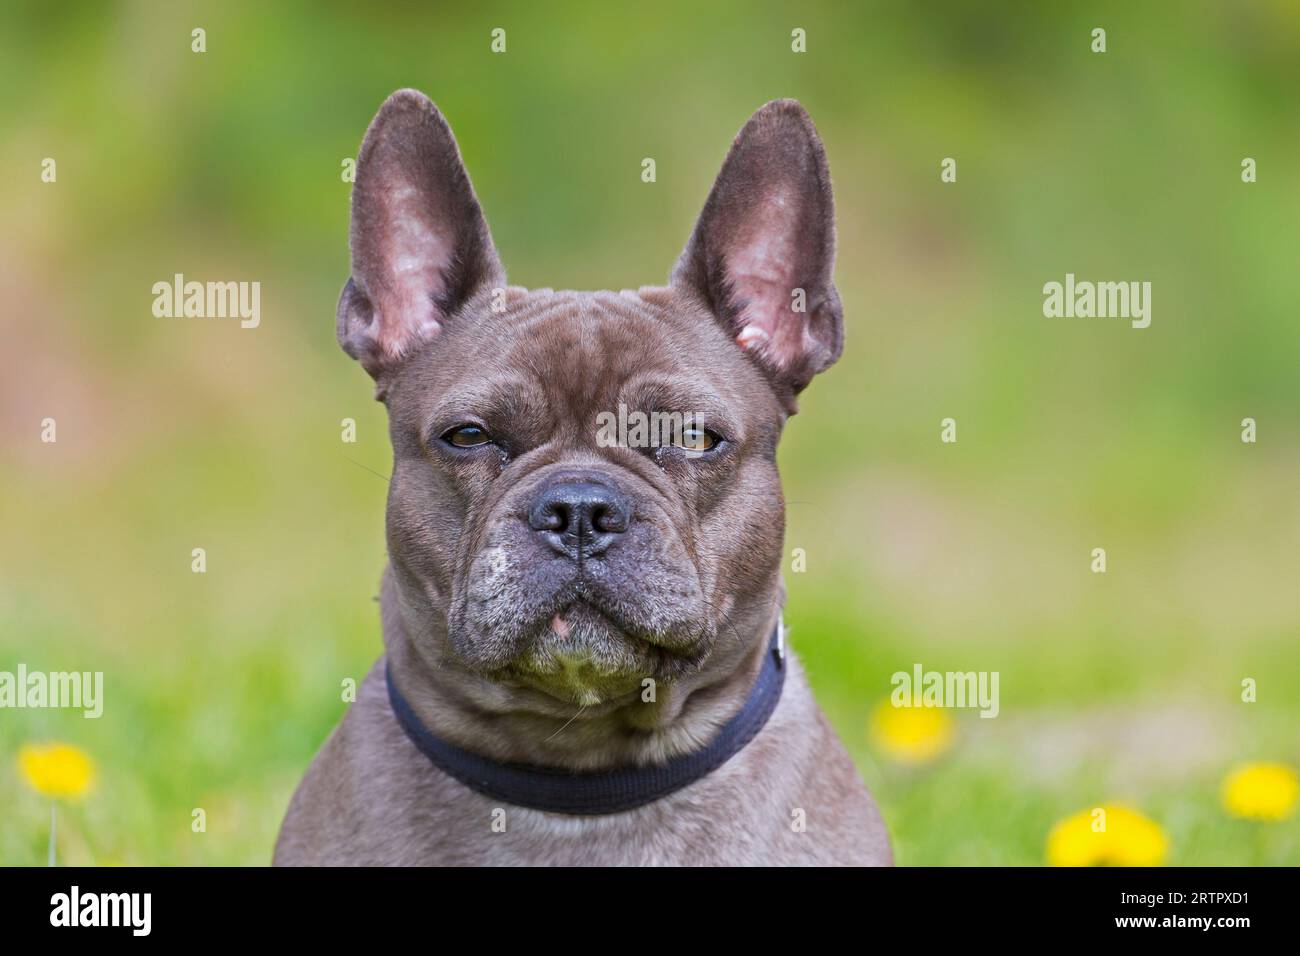 Lilac French bulldog / Isabella frenchie / Bouledogue Français, breed of French companion dog or toy dog in garden Stock Photo